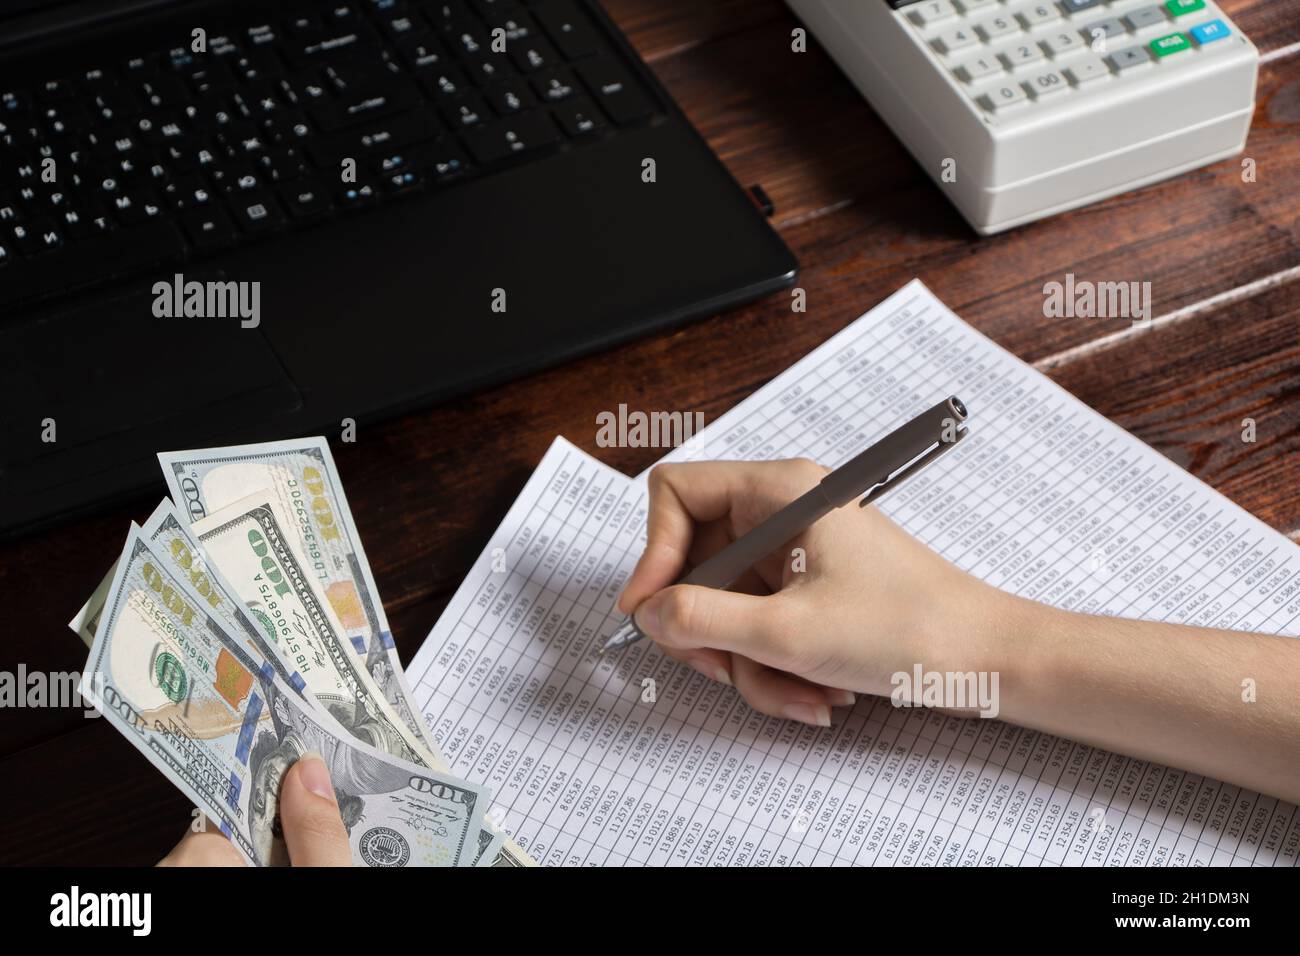 Obligation to pay wages and debts in the company.A cashier holds money dollars over an office work space with documents, a cash register, a phone, and Stock Photo